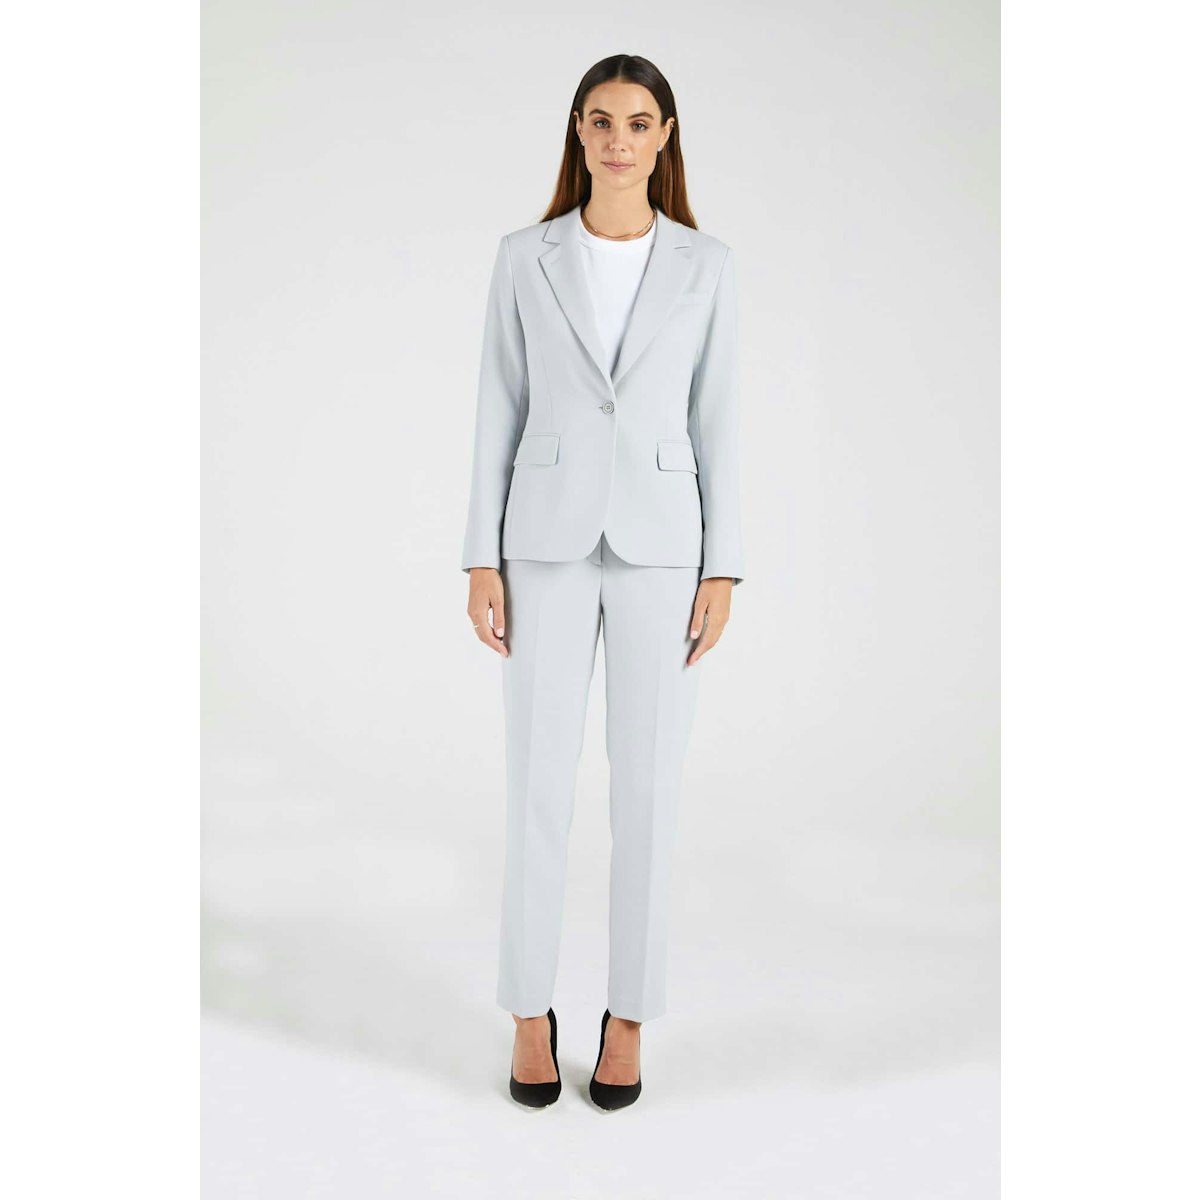 InStitchu Collection The Cawley Powder Grey Jacket